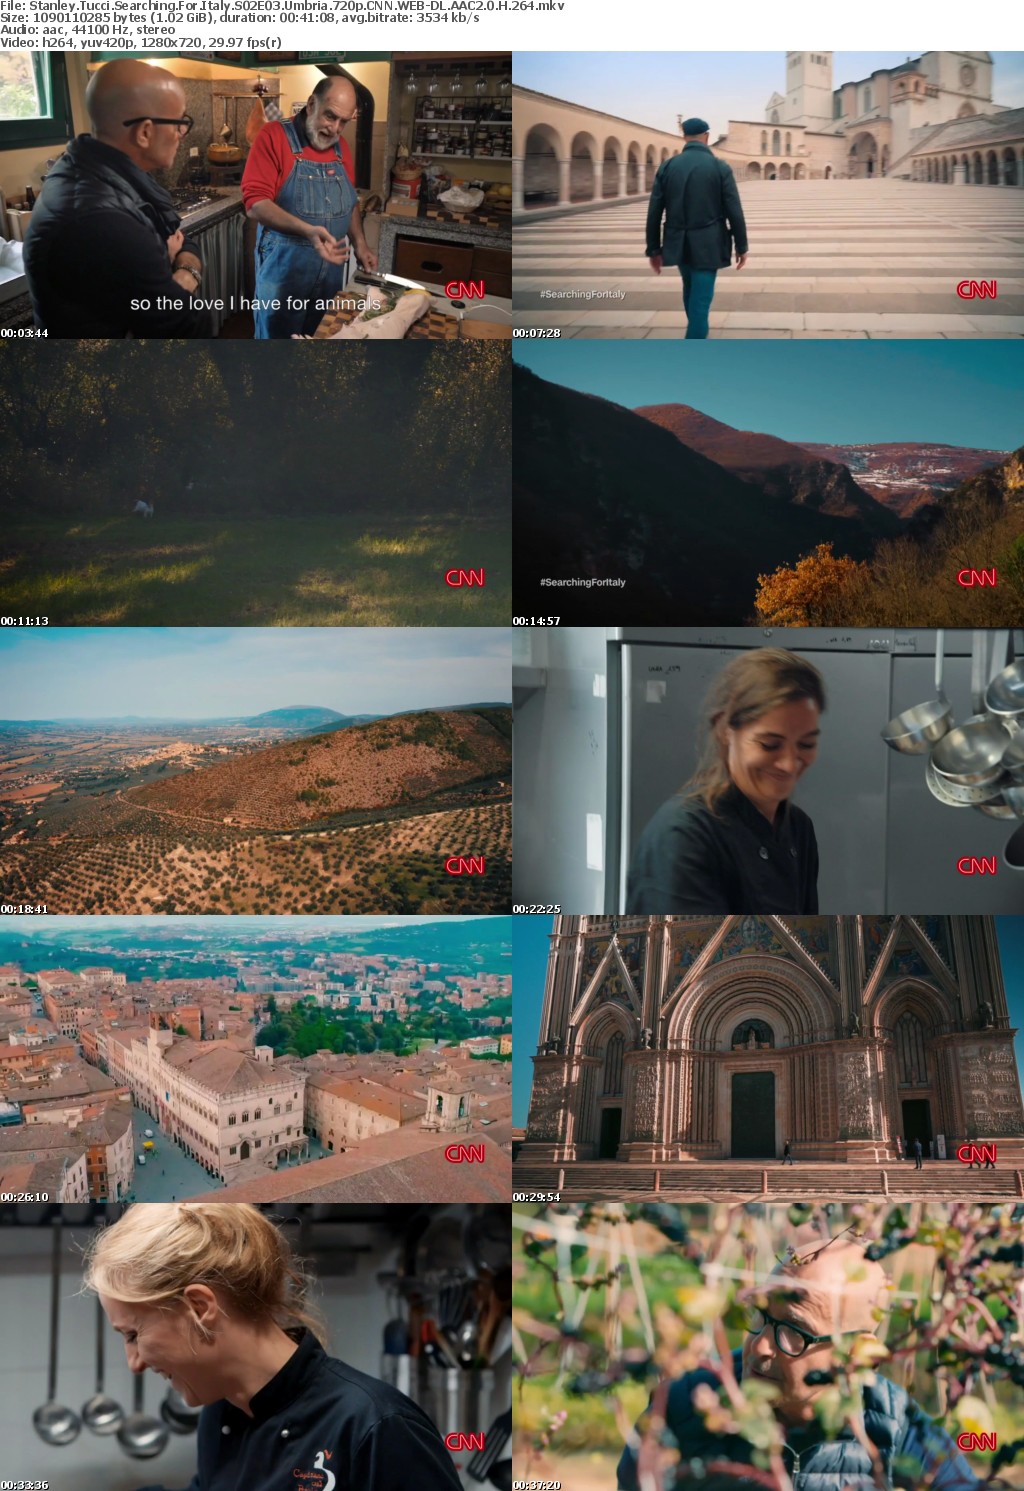 Stanley Tucci Searching For Italy S02E03 Umbria 720p CNN WEB-DL AAC2 0 H 264